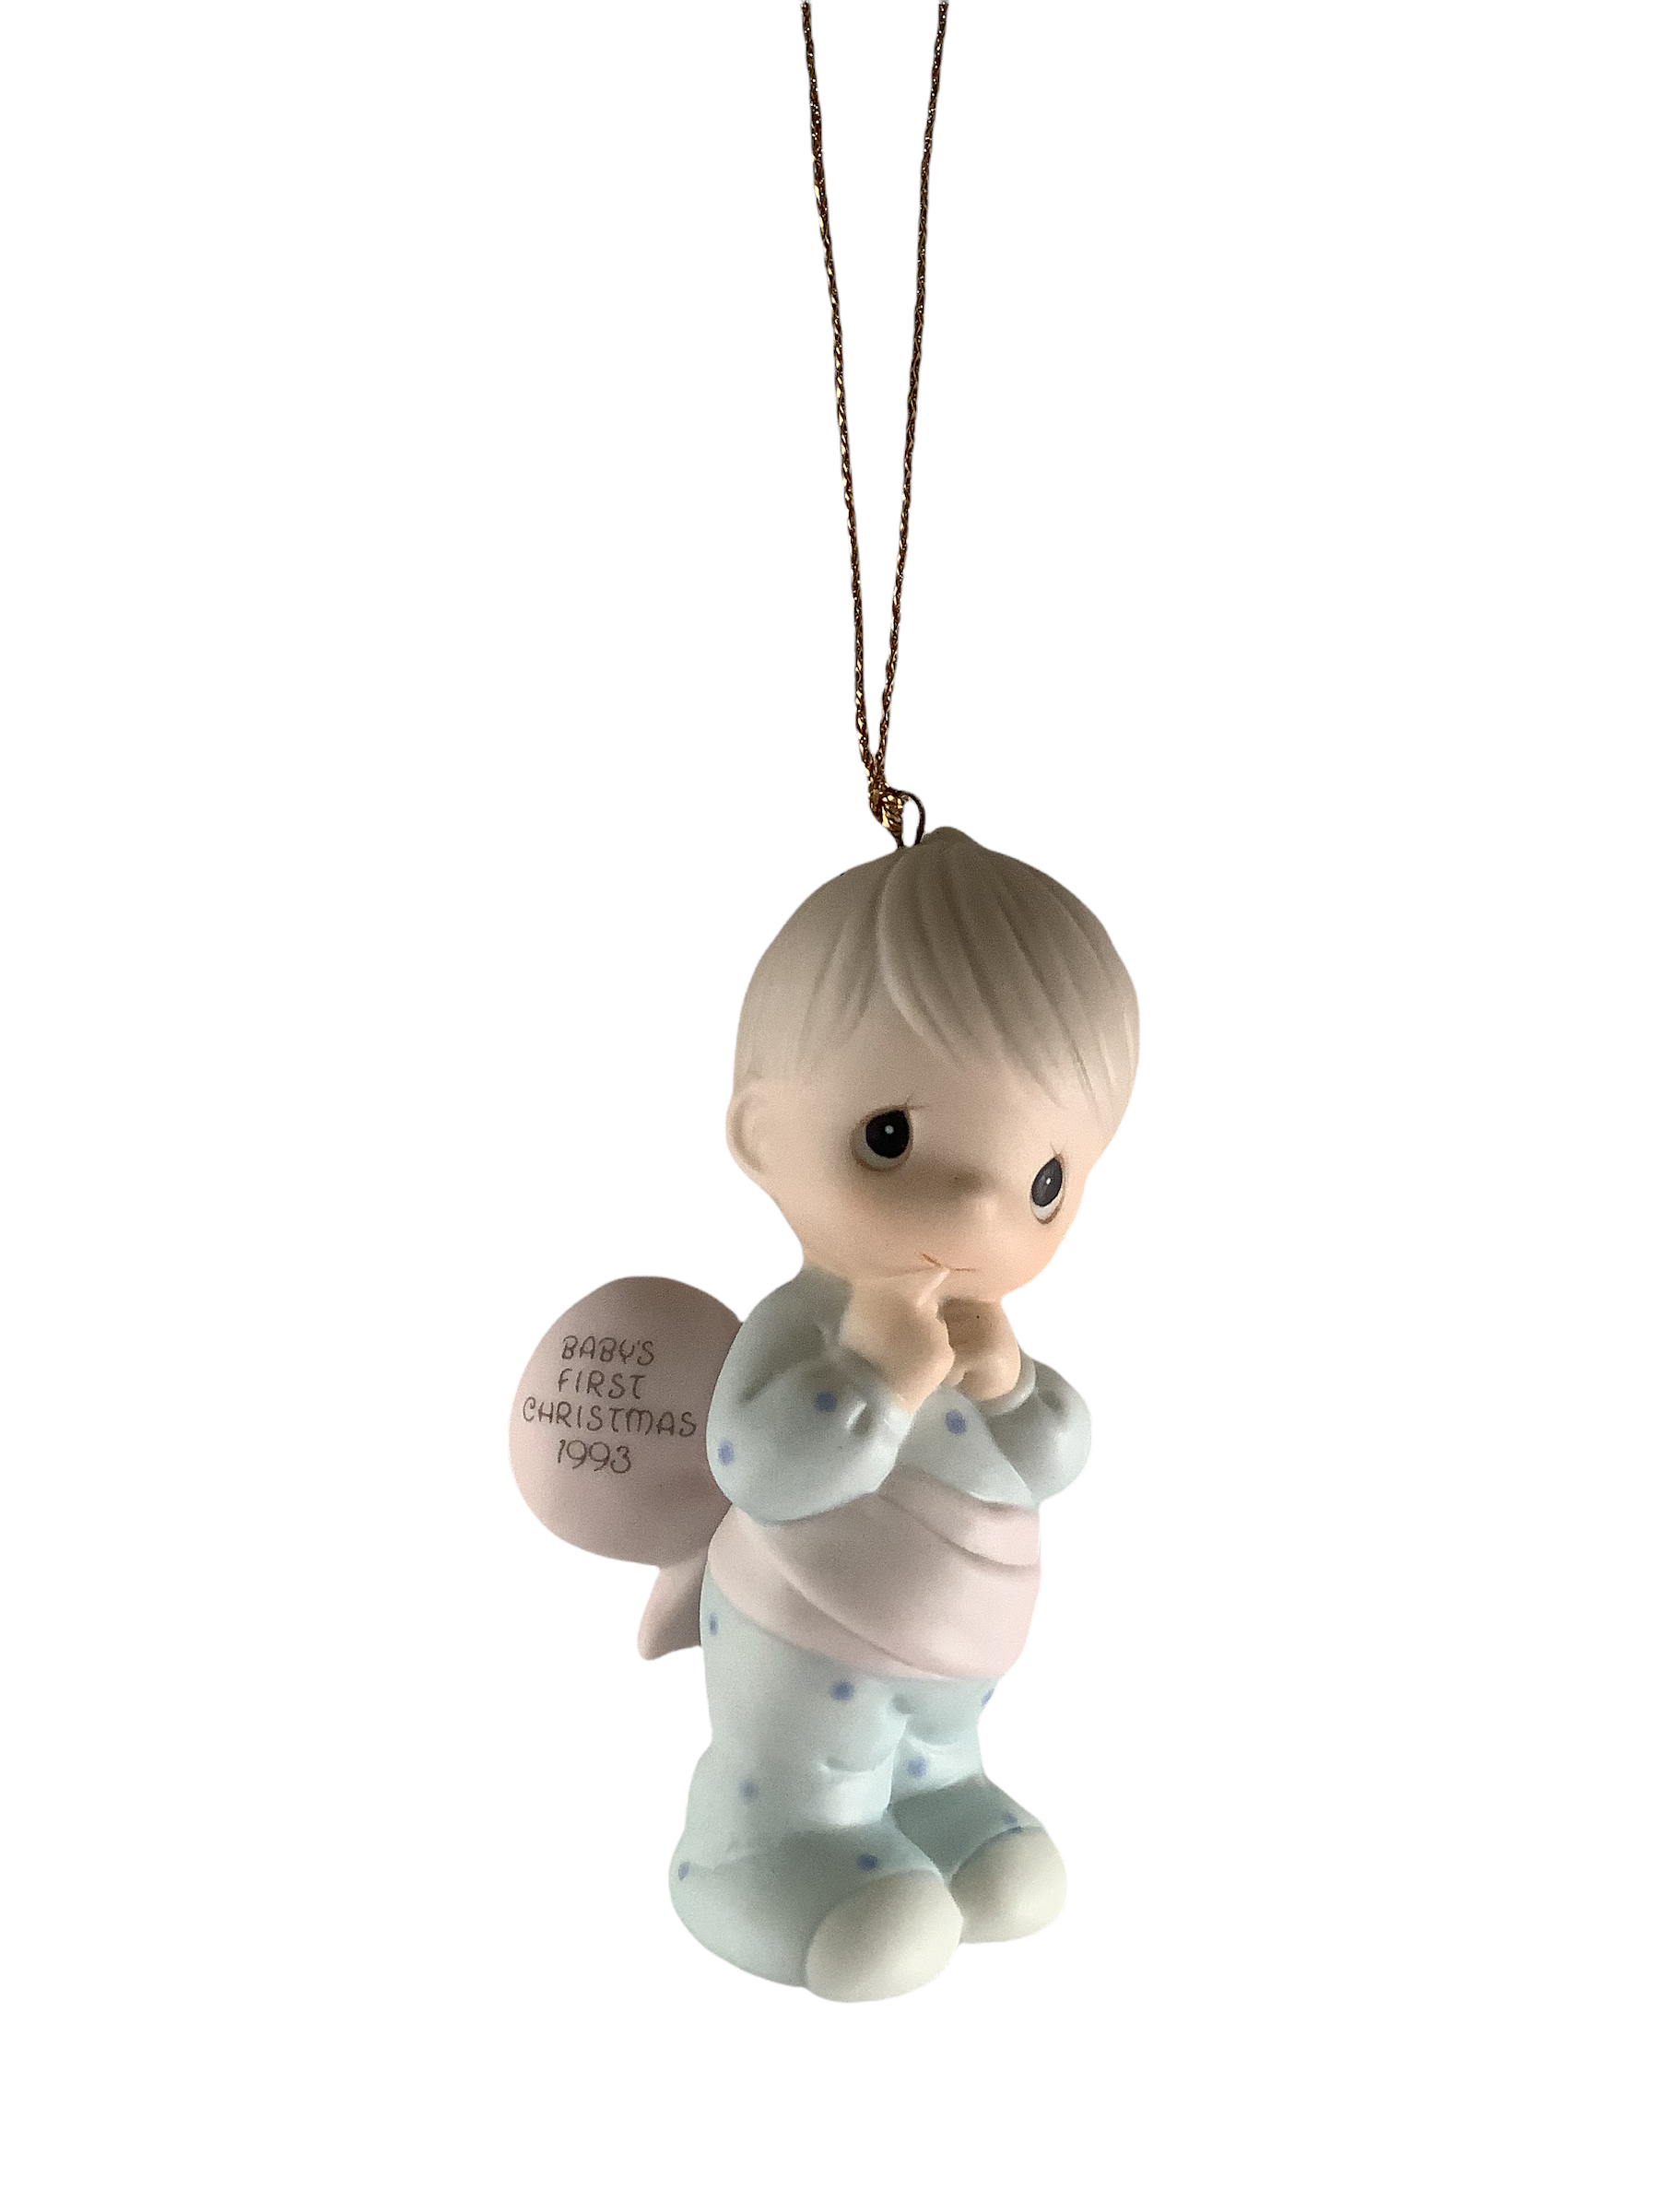 Baby's First Christmas 1993 (Boy) - Precious Moment Ornament